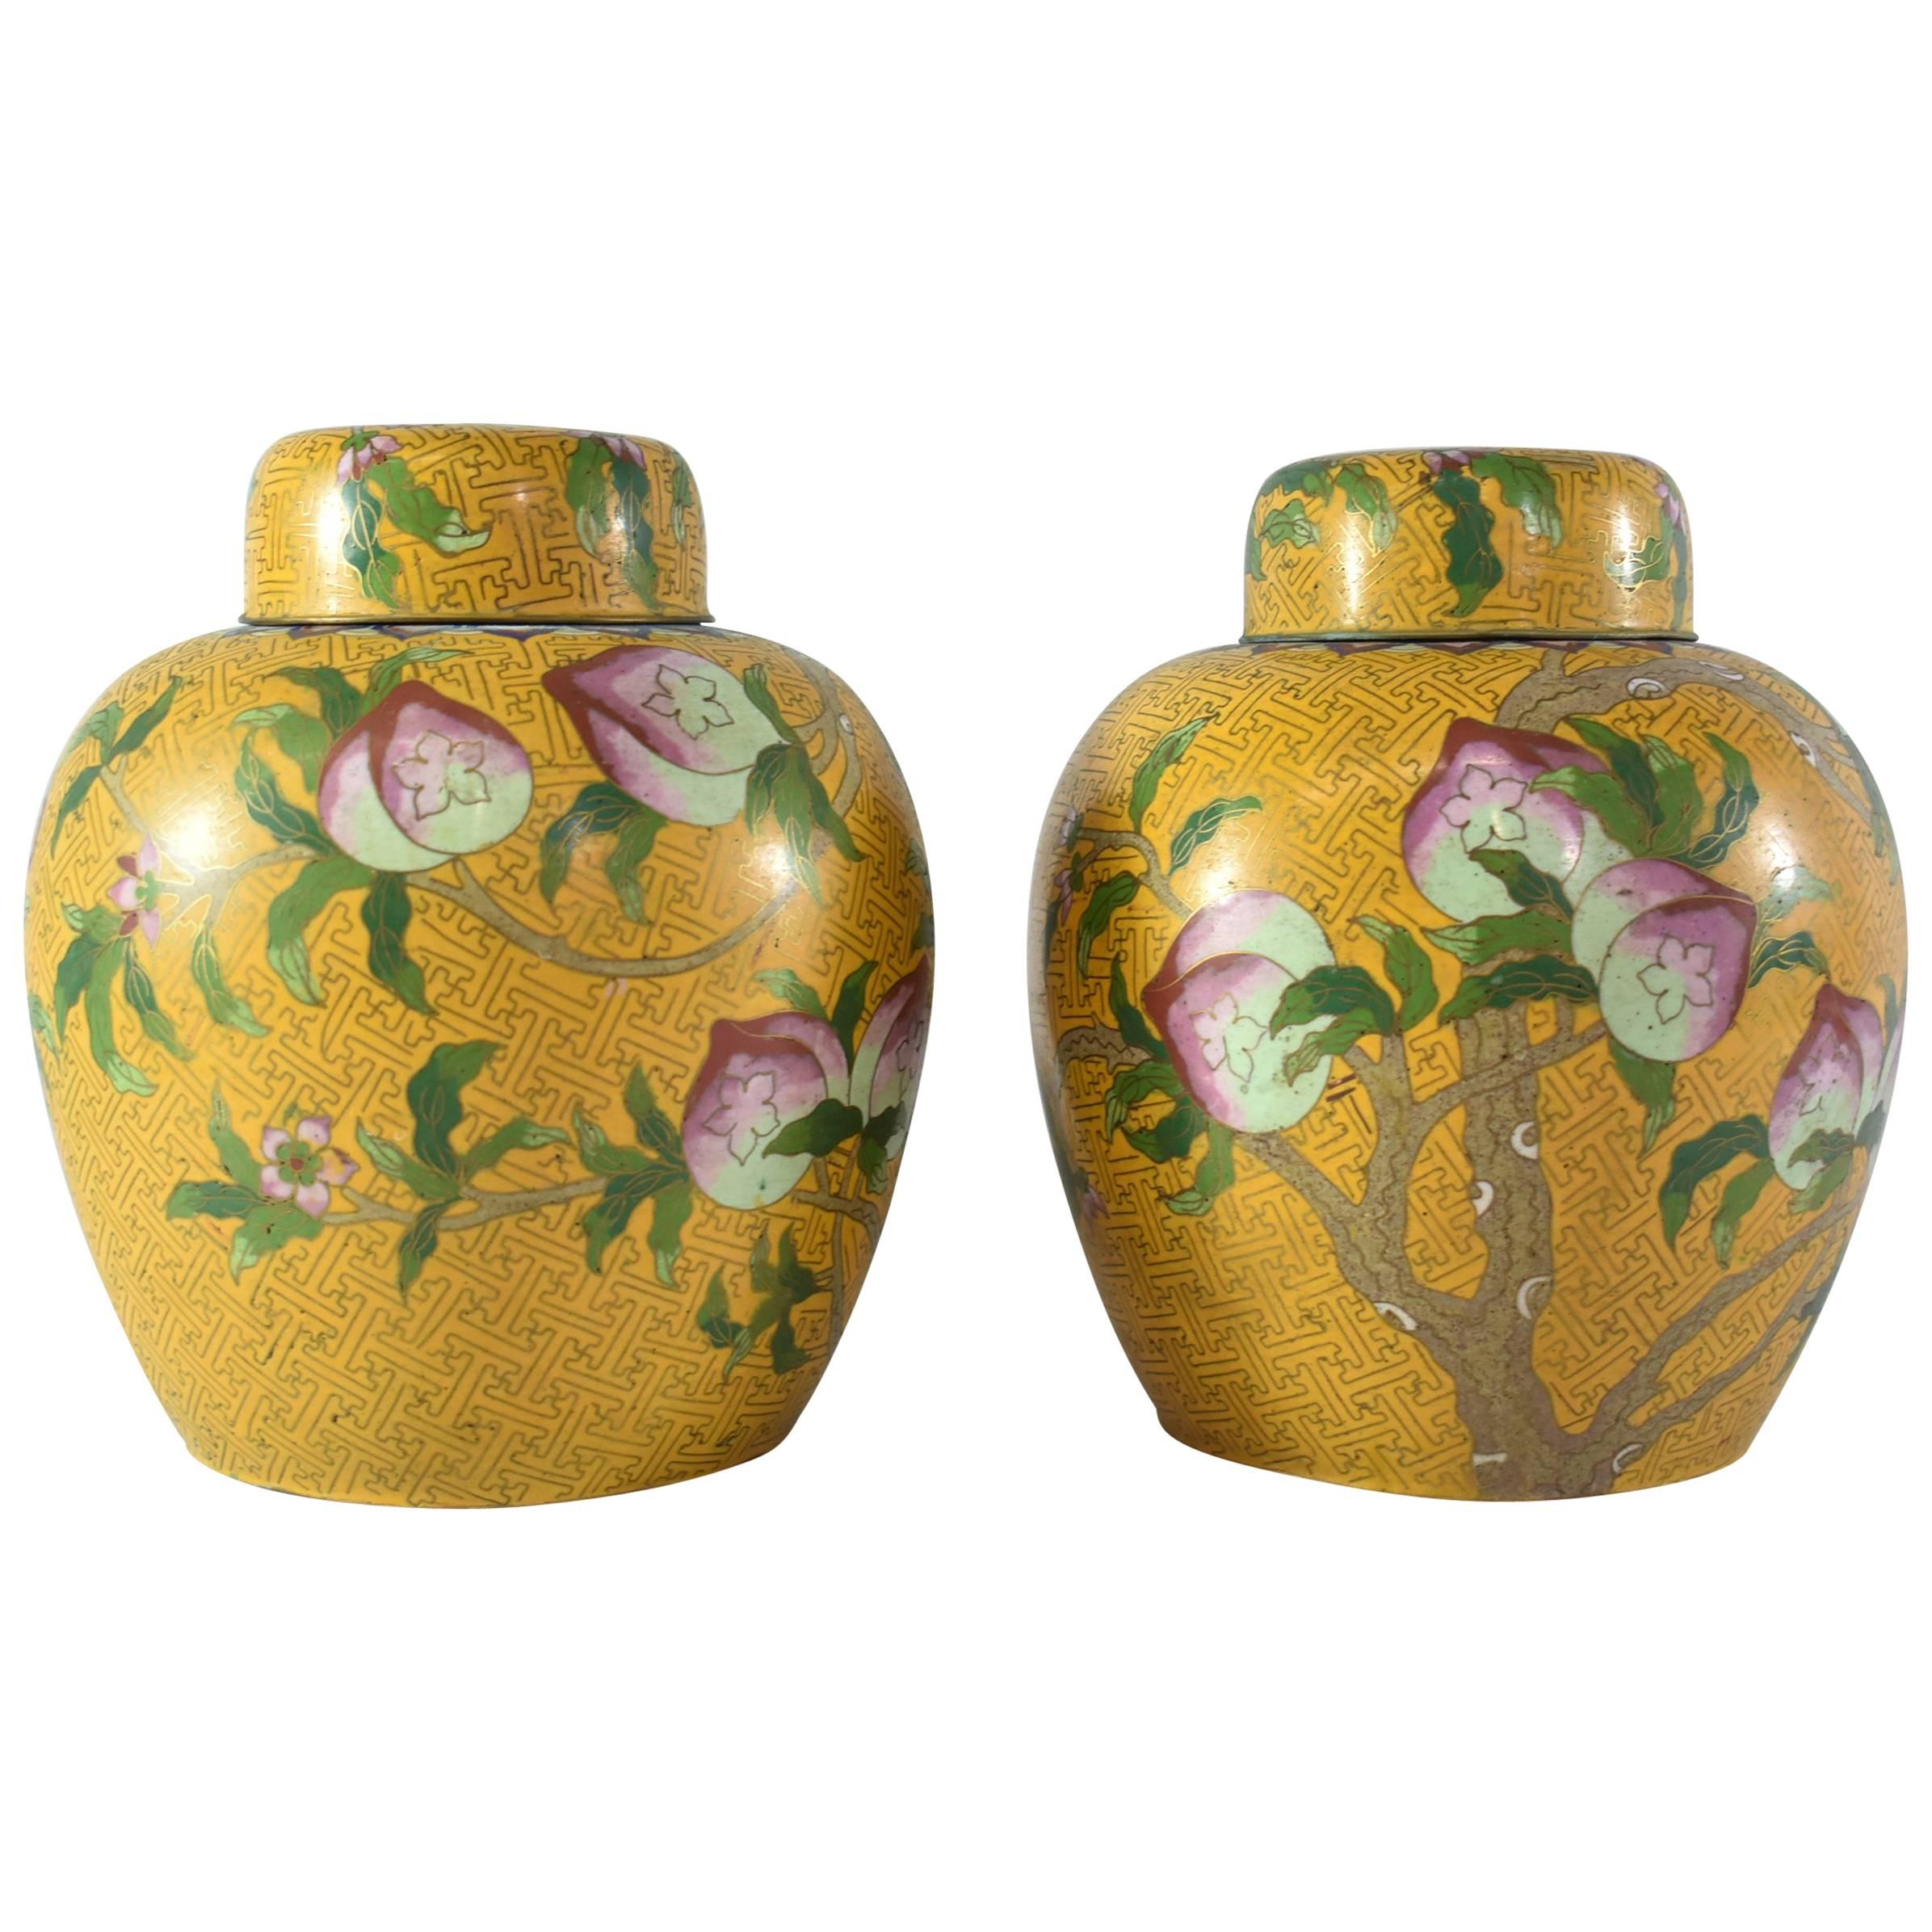 20th Century Cloisonne Ginger Jars with Lids in Peach Tree Pattern